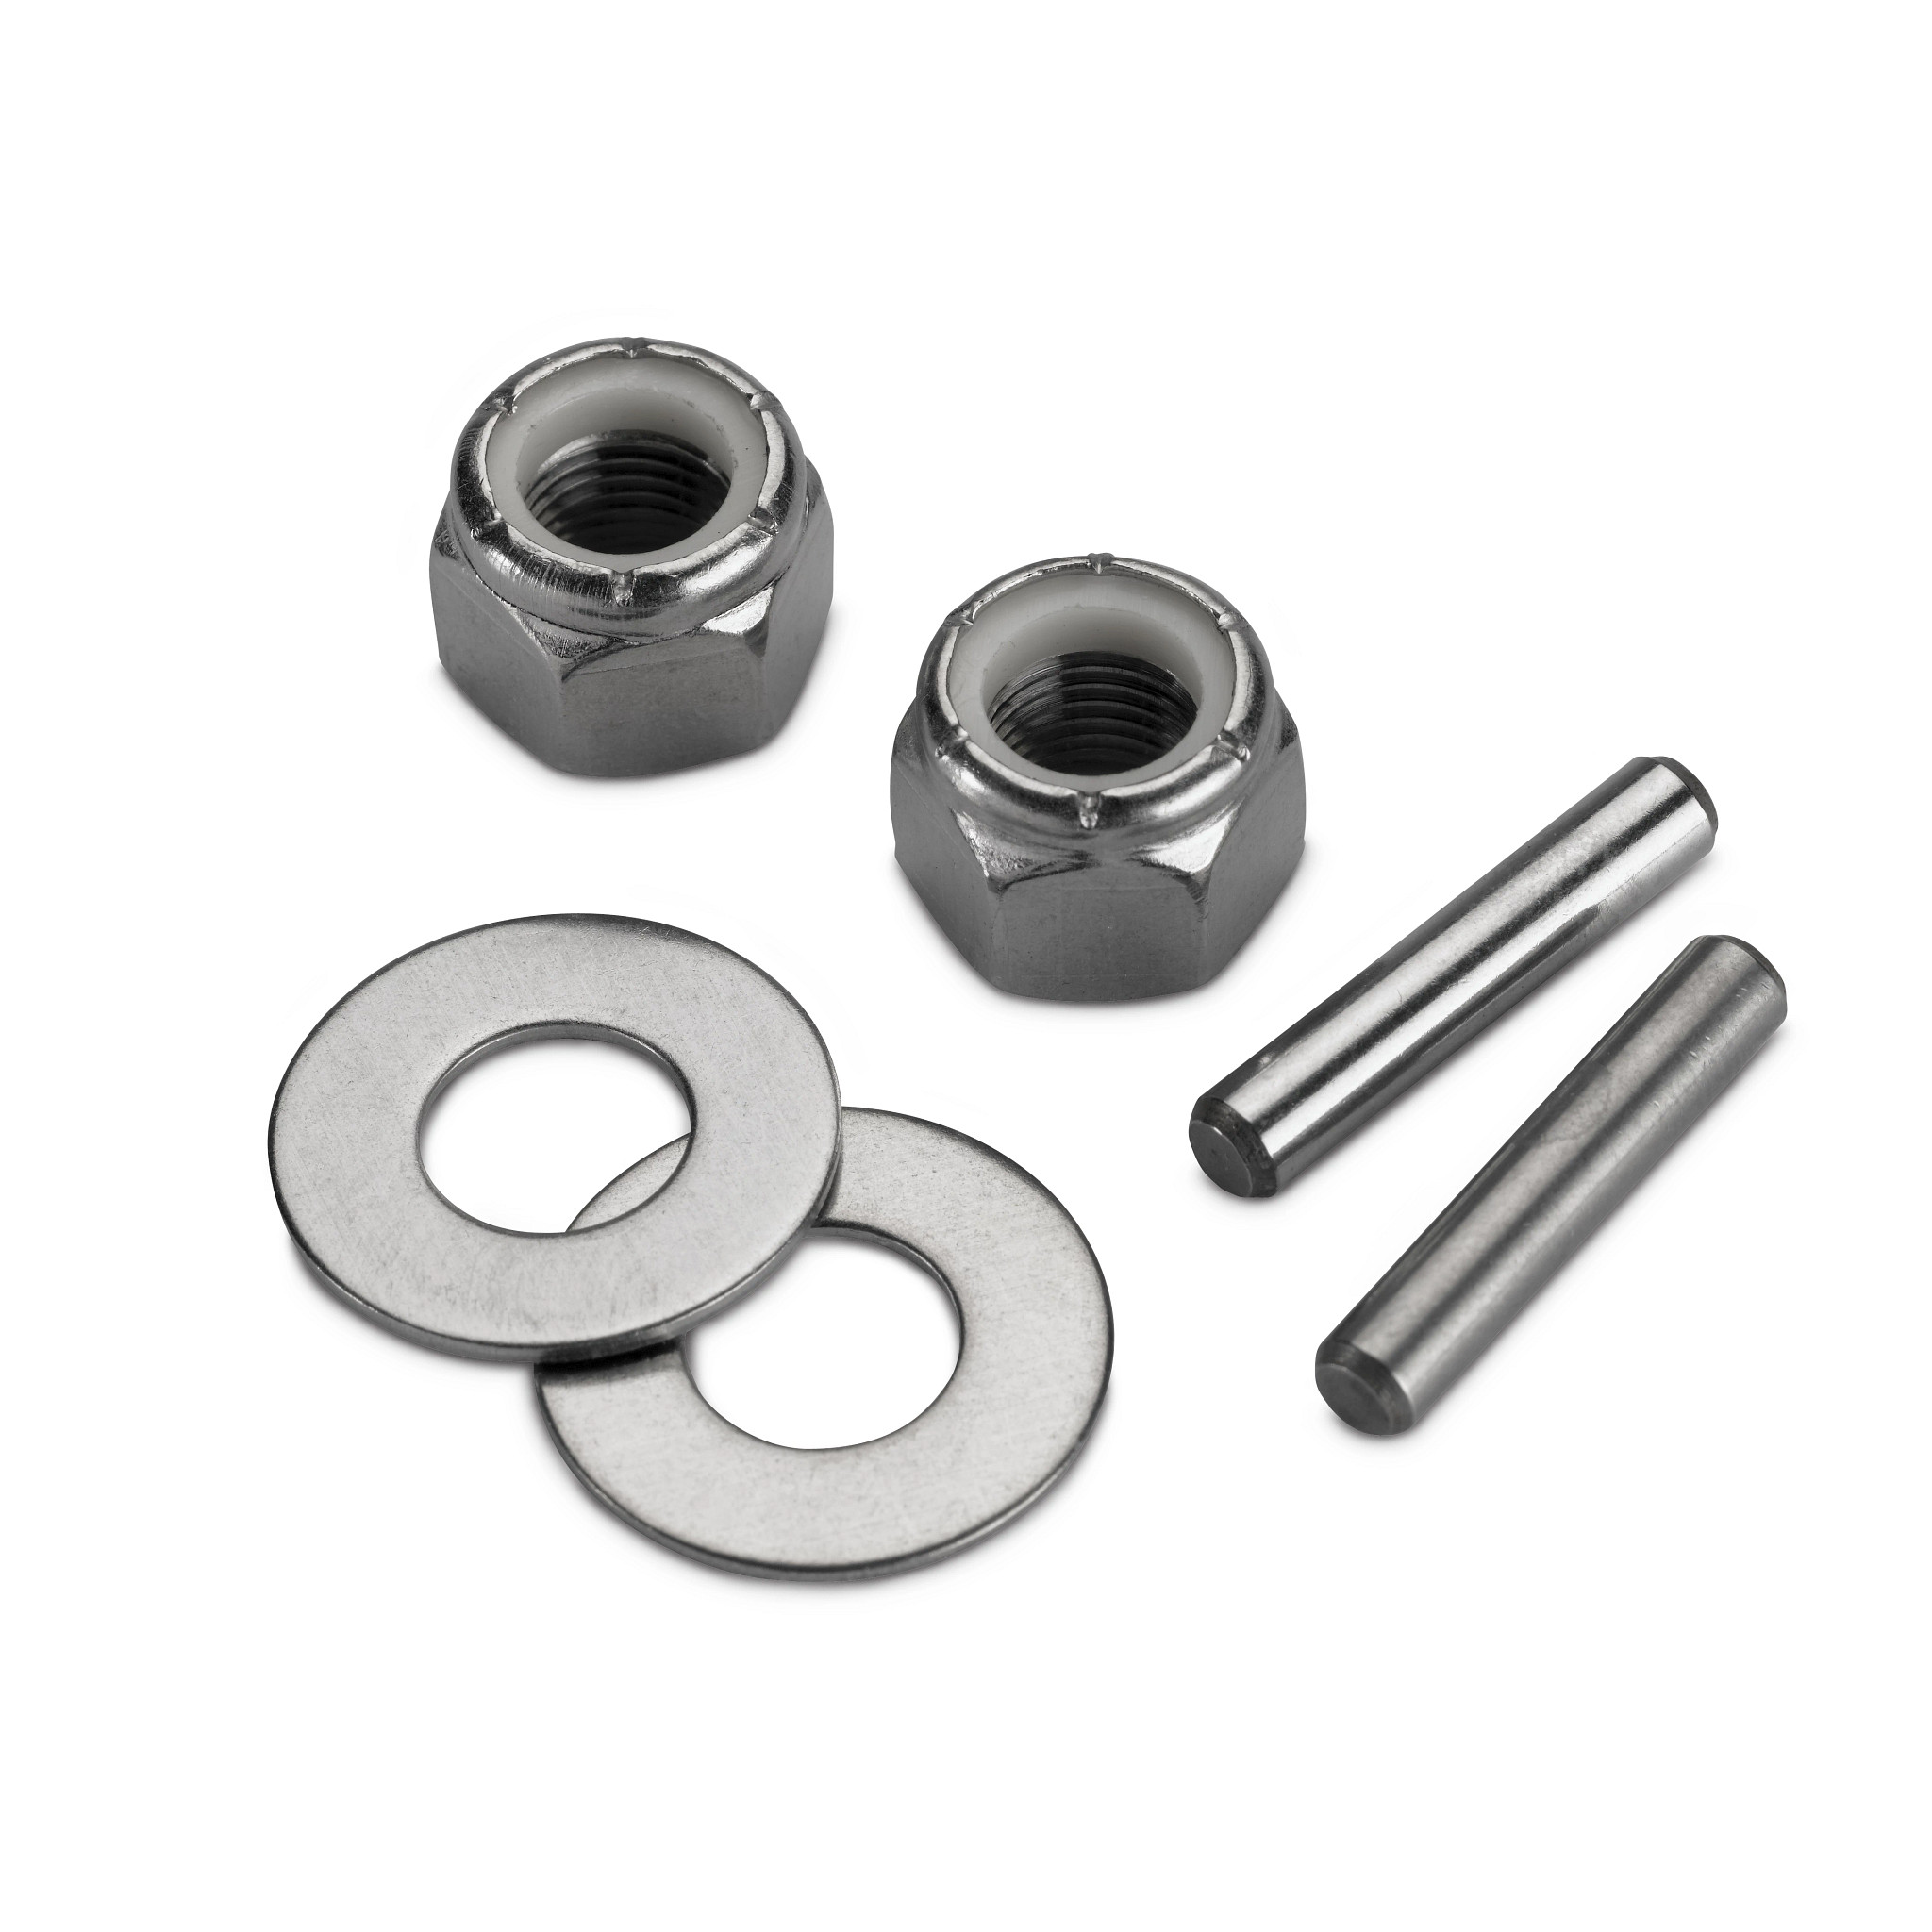 6 PCS MKP-34 Prop & Nut Kit E #1865019 Fits for MKP-33 and MKP-38 Props Heavy Duty 